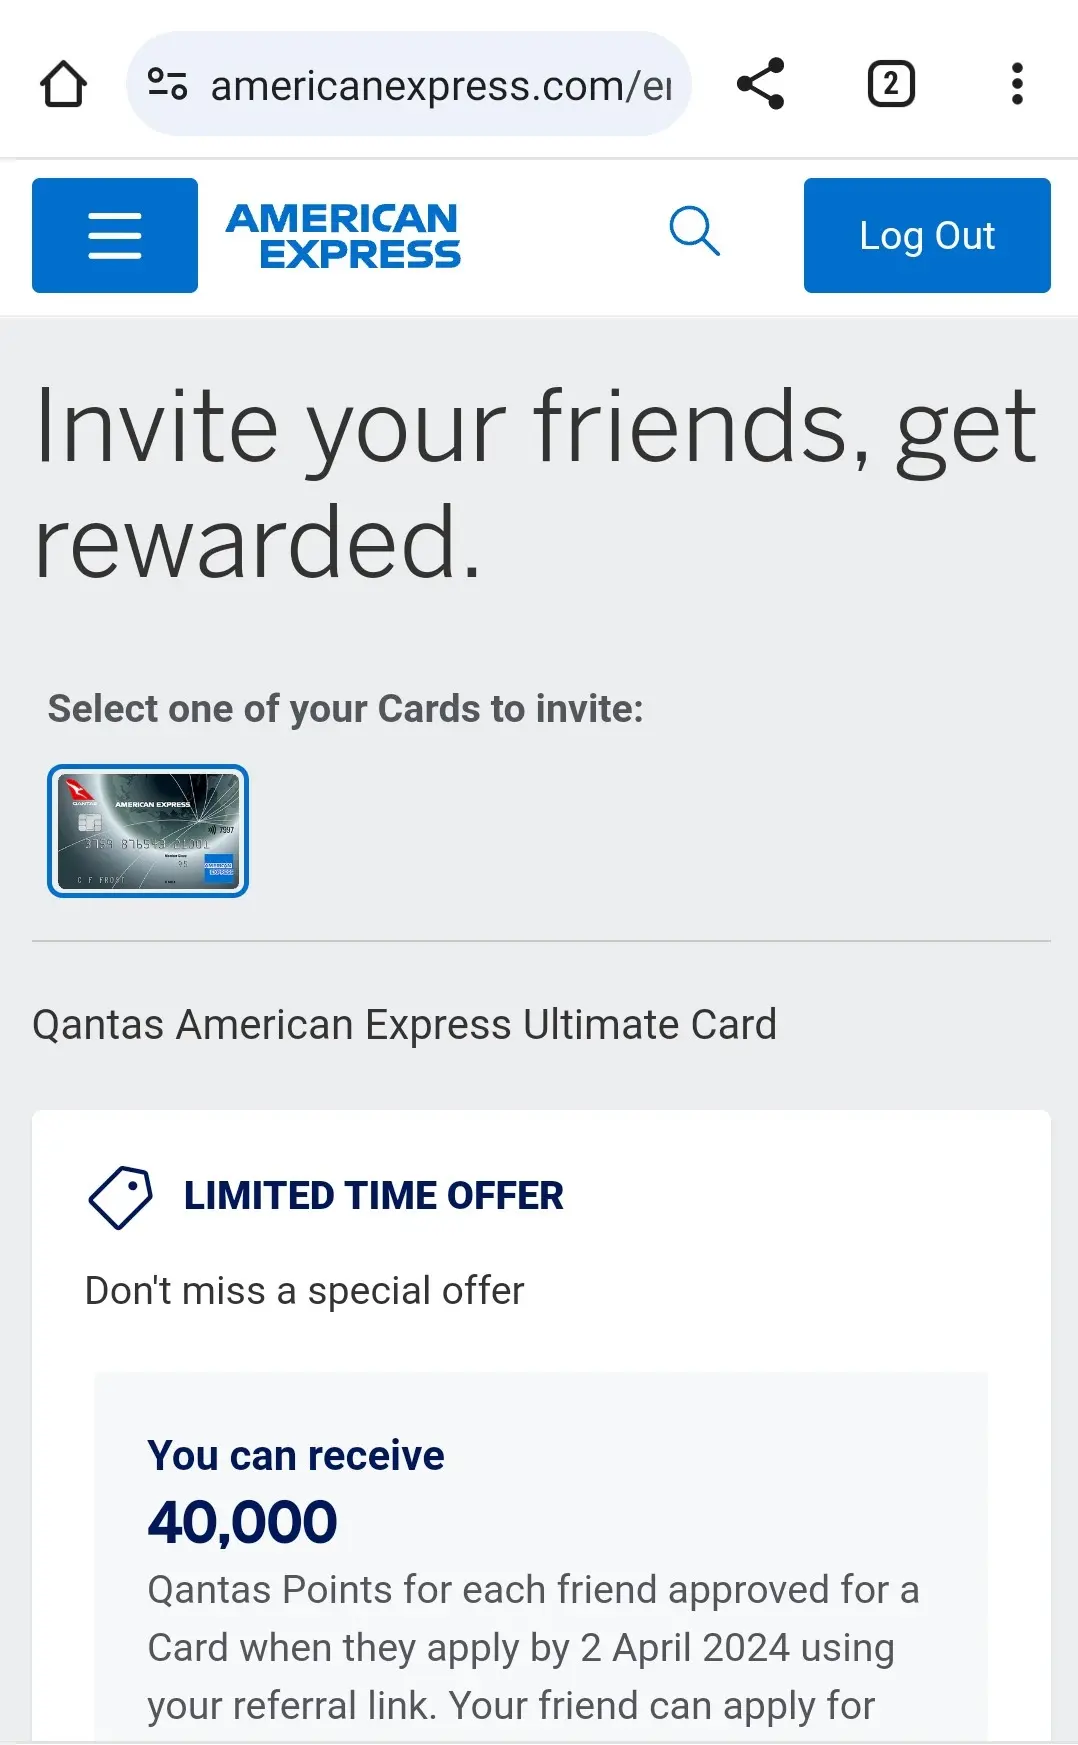 Details of an Amex referral bonus offer for the Qantas American Express Ultimate Card.